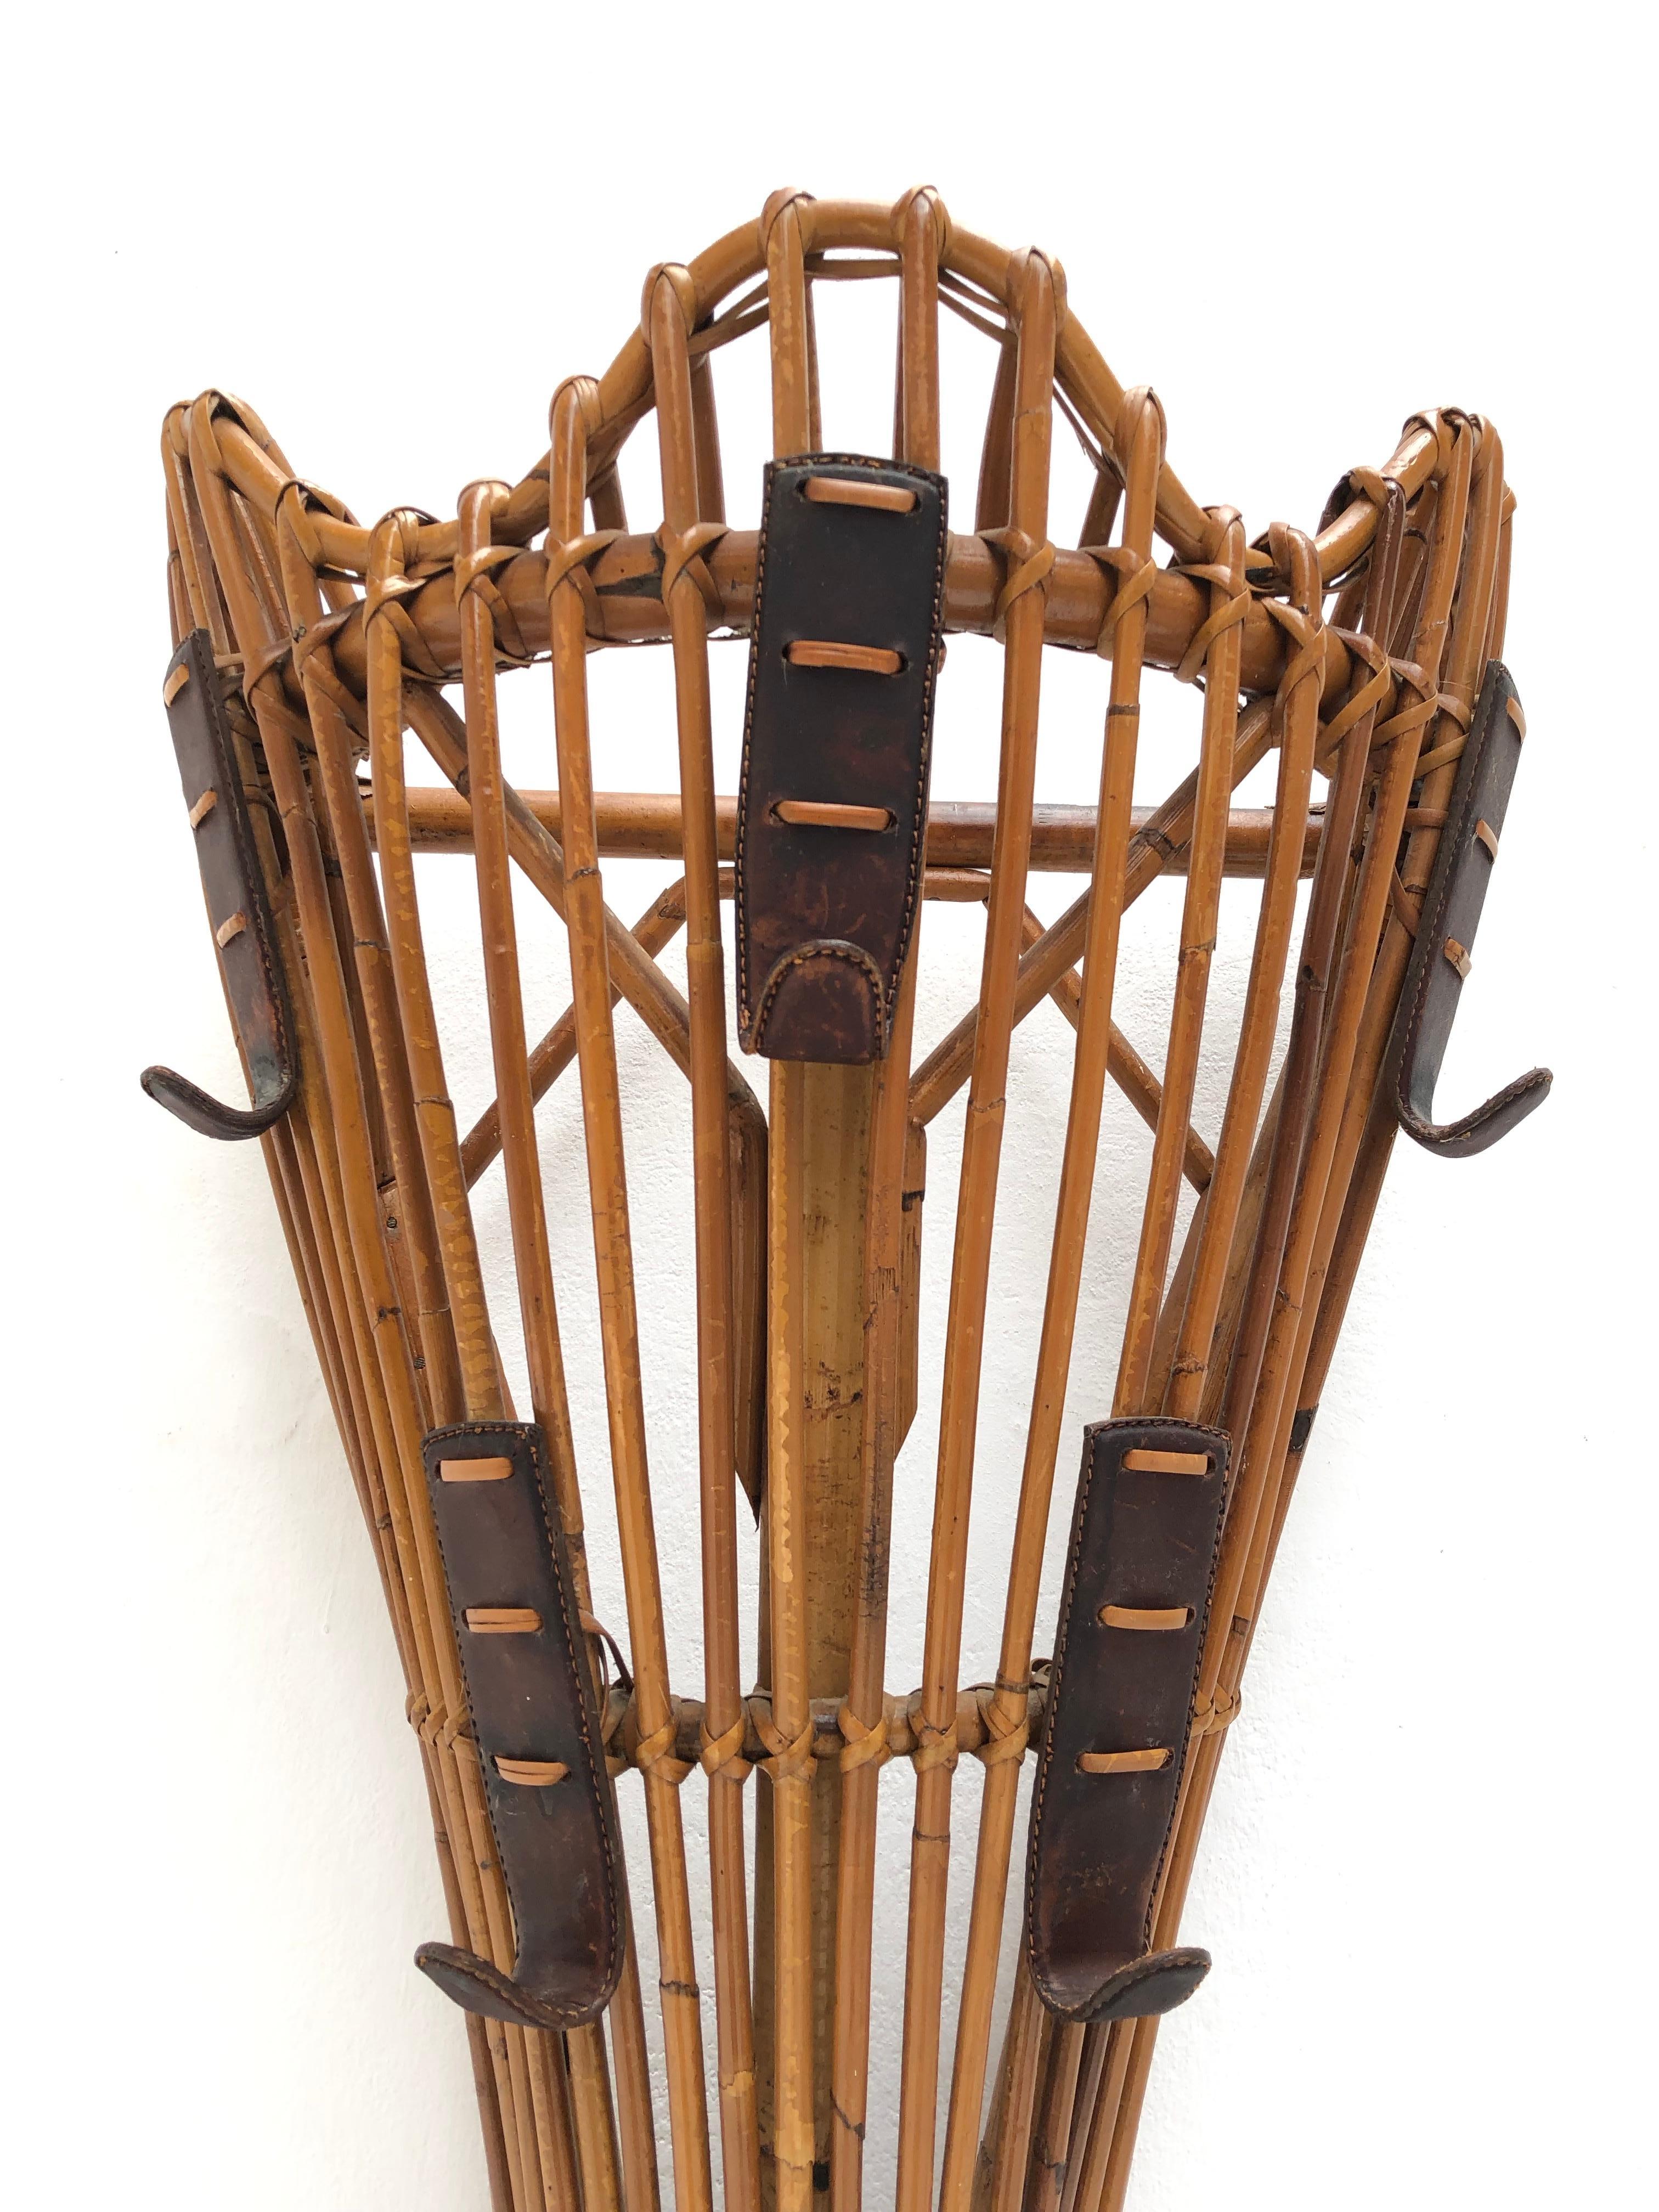 Very nice and uncommon 1950s Italian rattan coatrack with very nice detailed Leather hooks.

This coatrack was all handcrafted by Italian wicker craftsmen of Bonacina and has an amazing structure of bamboo with nicely detailed wickerwork

In the